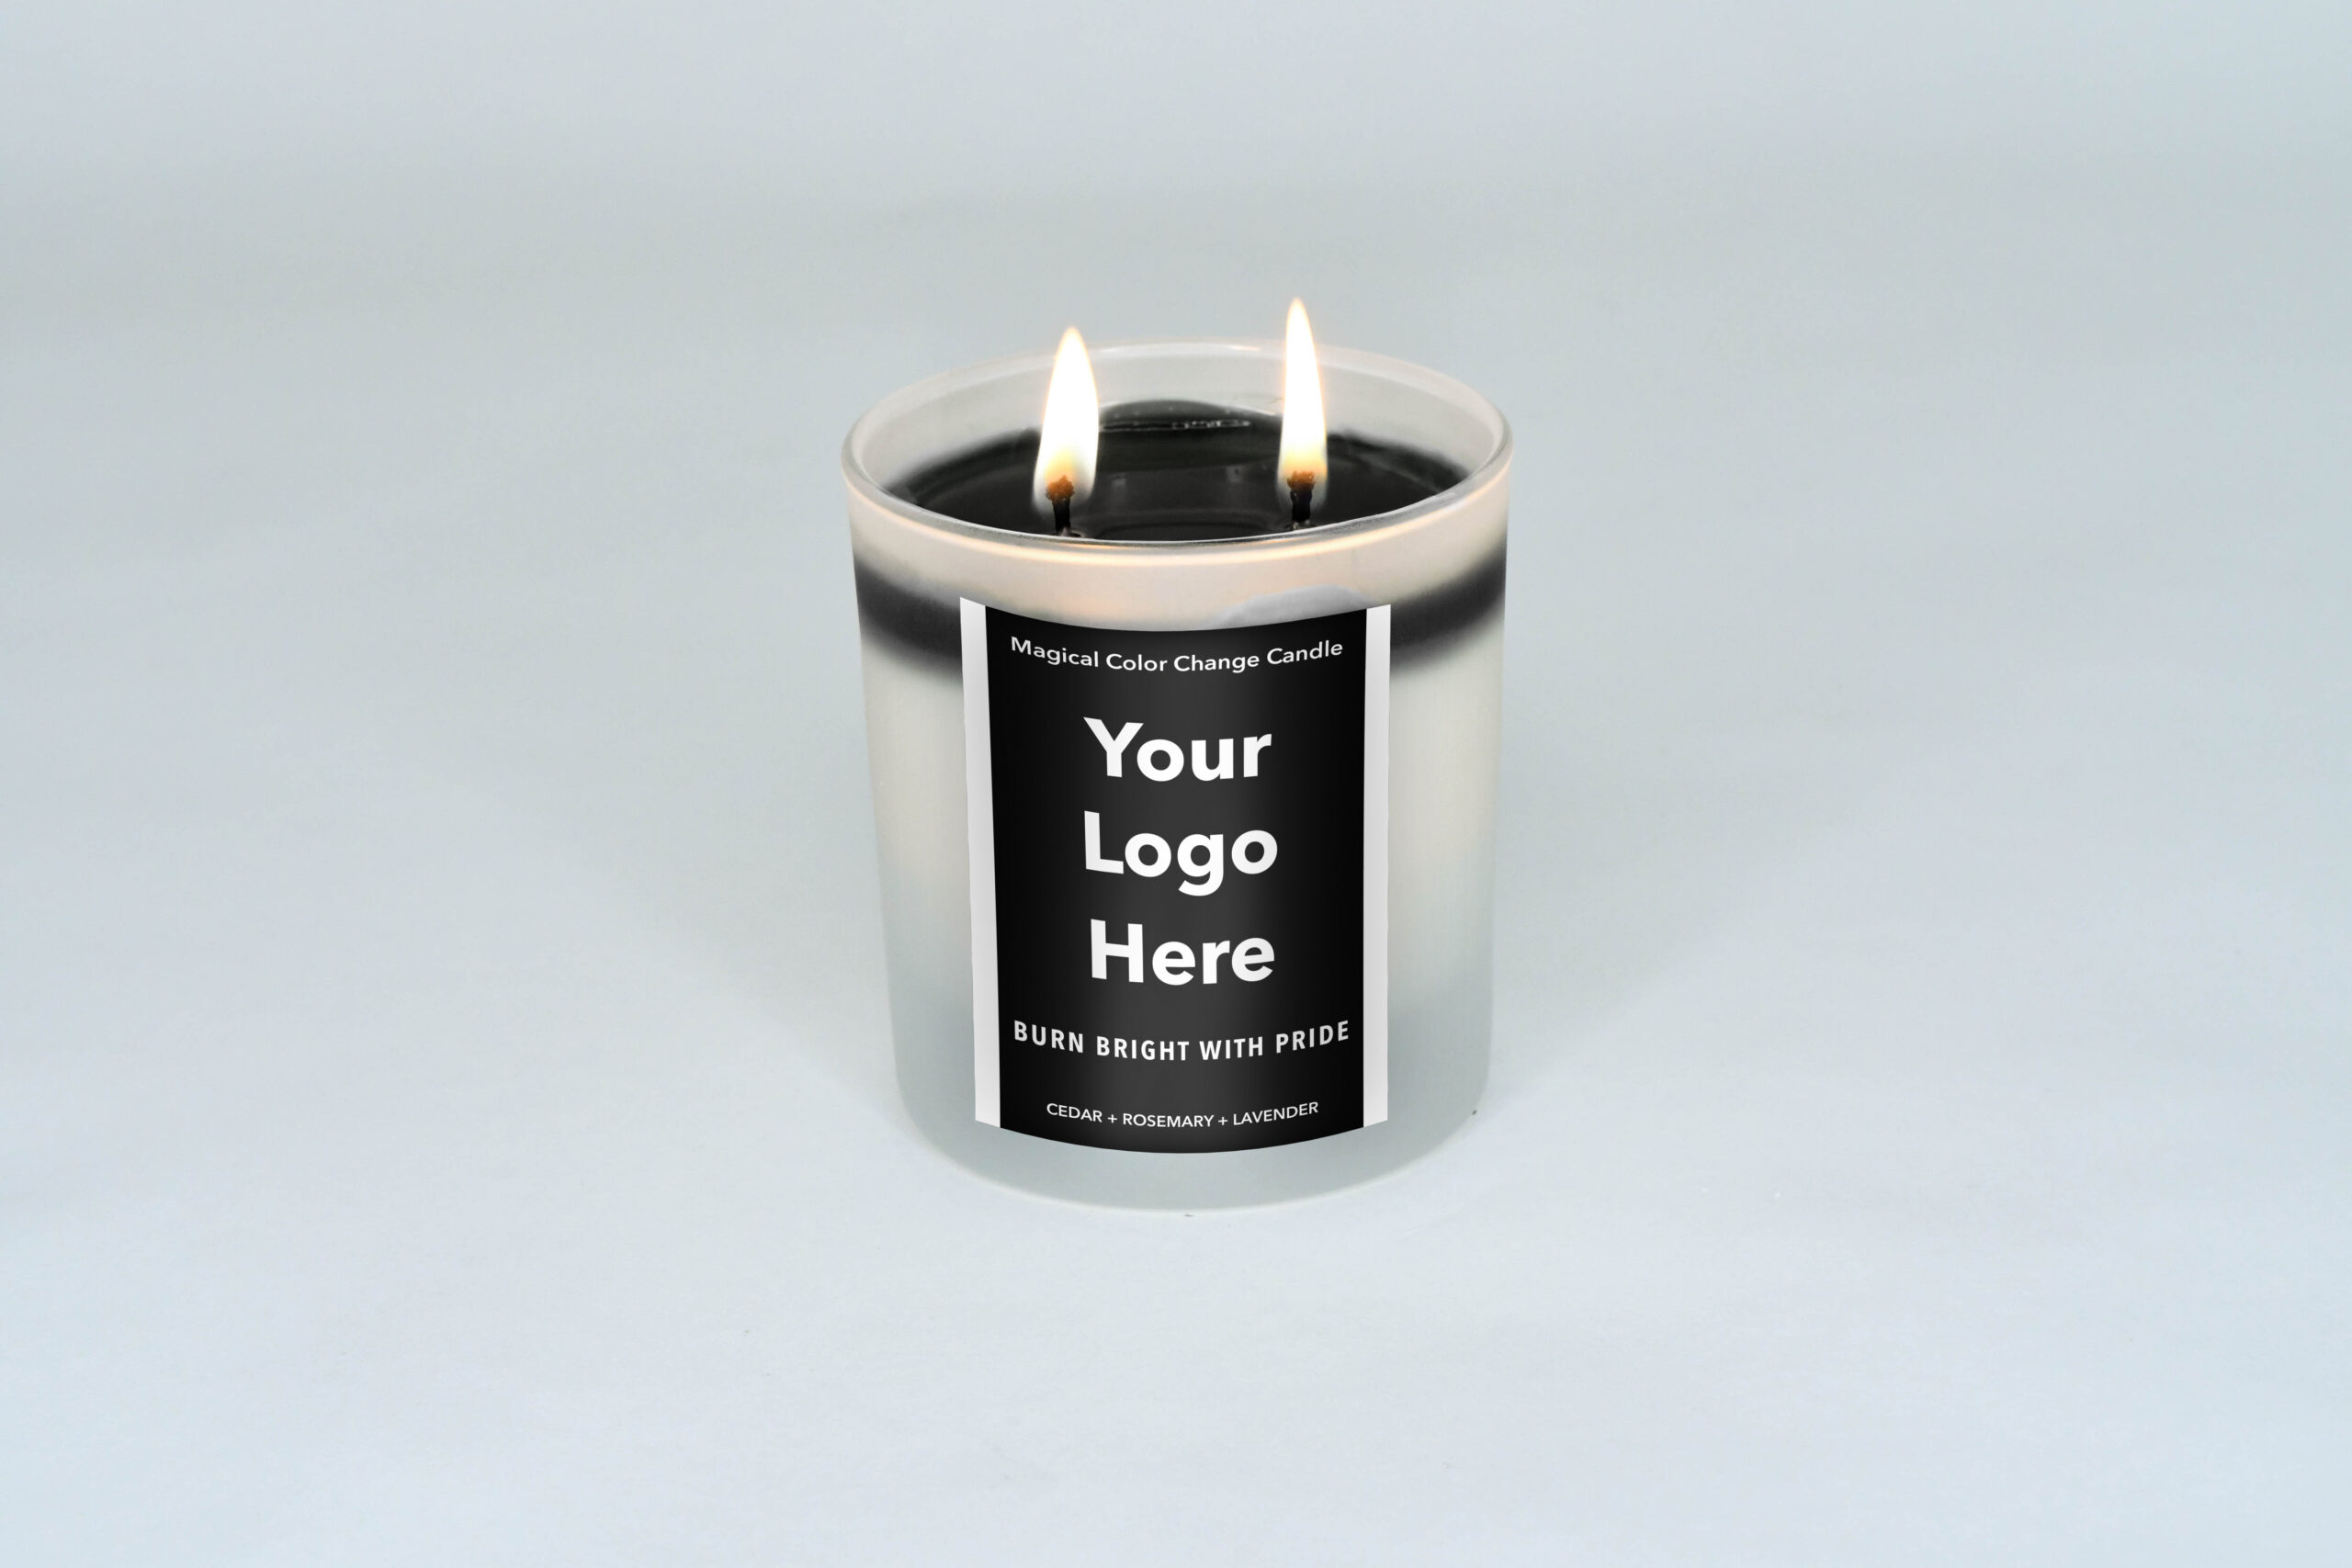 Black candle, your logo here, lit, full wax pool